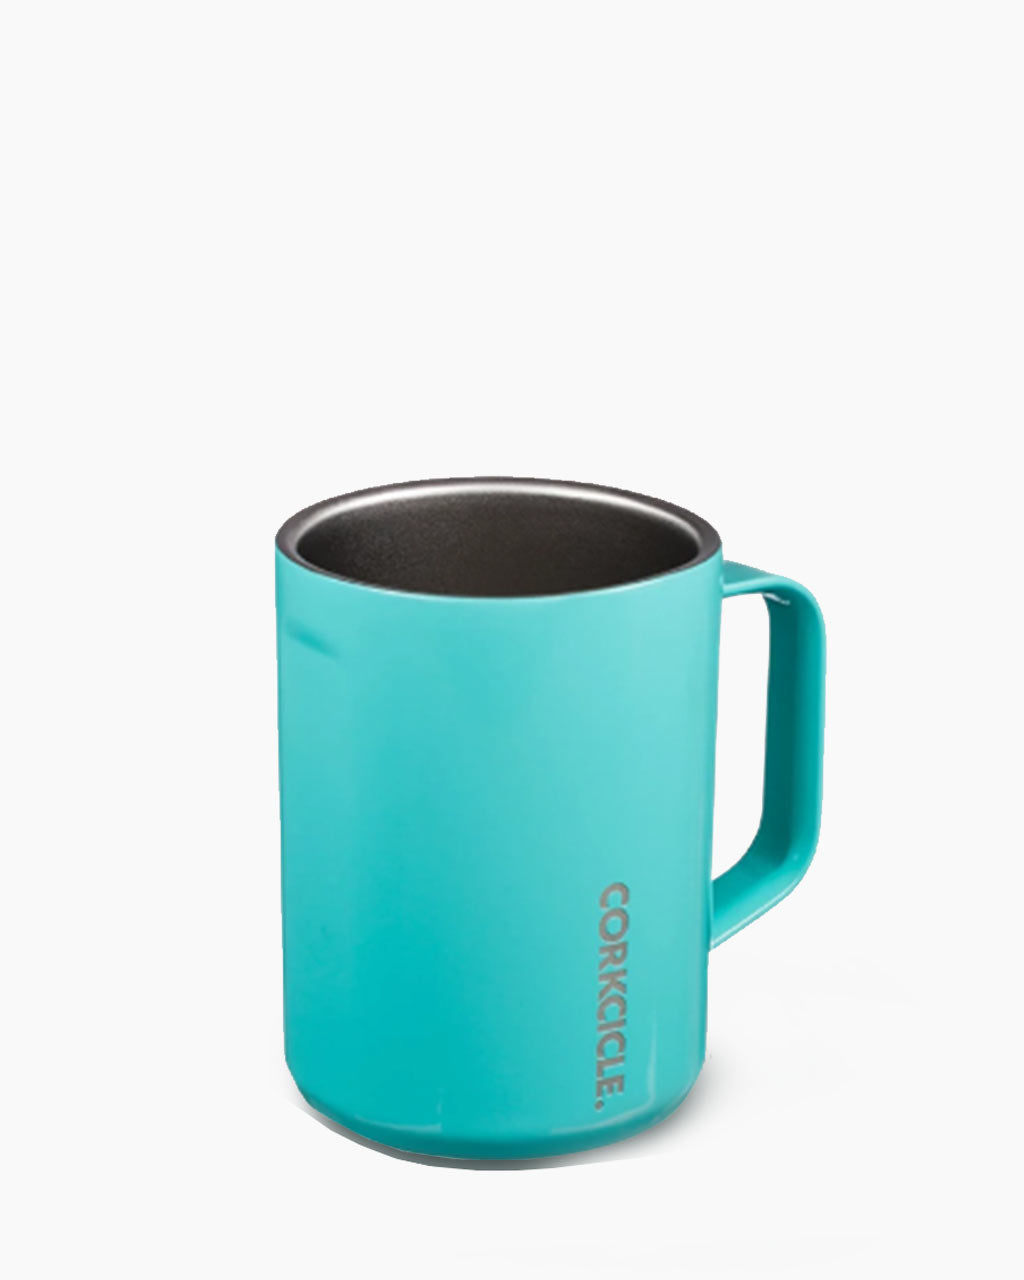 Corkcicle - 16 Oz Gloss Turquoise Stainless Steel Classic Bottle - Turquoise